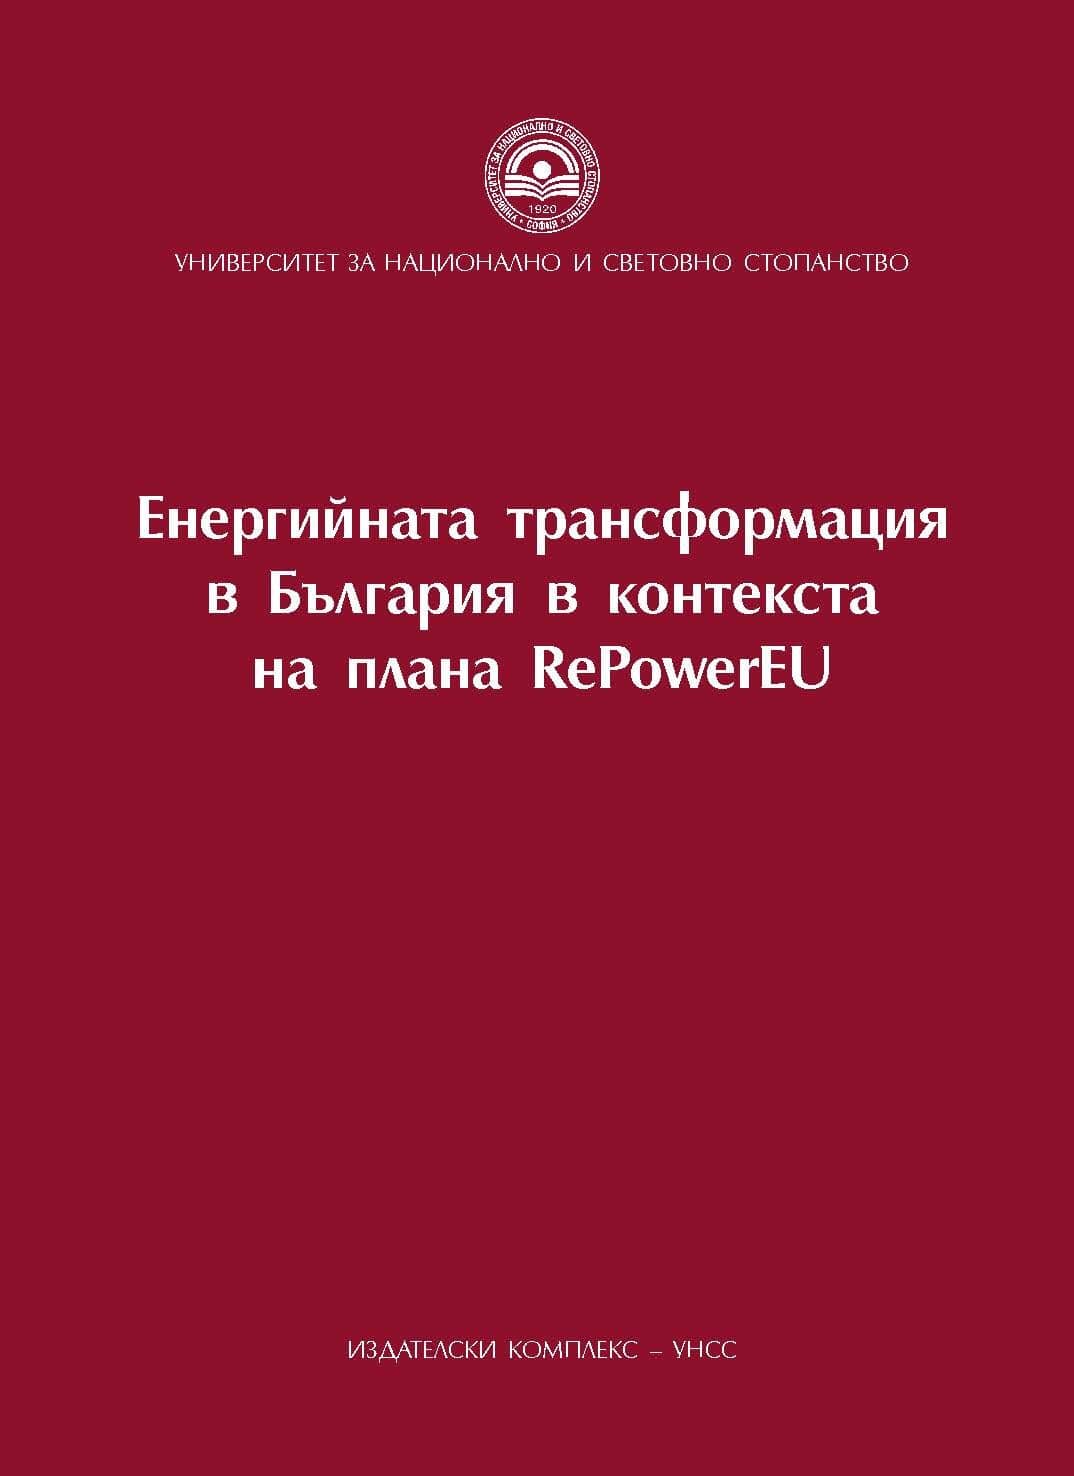 The role of REPowerEU in development of the Bulgarian industry Cover Image